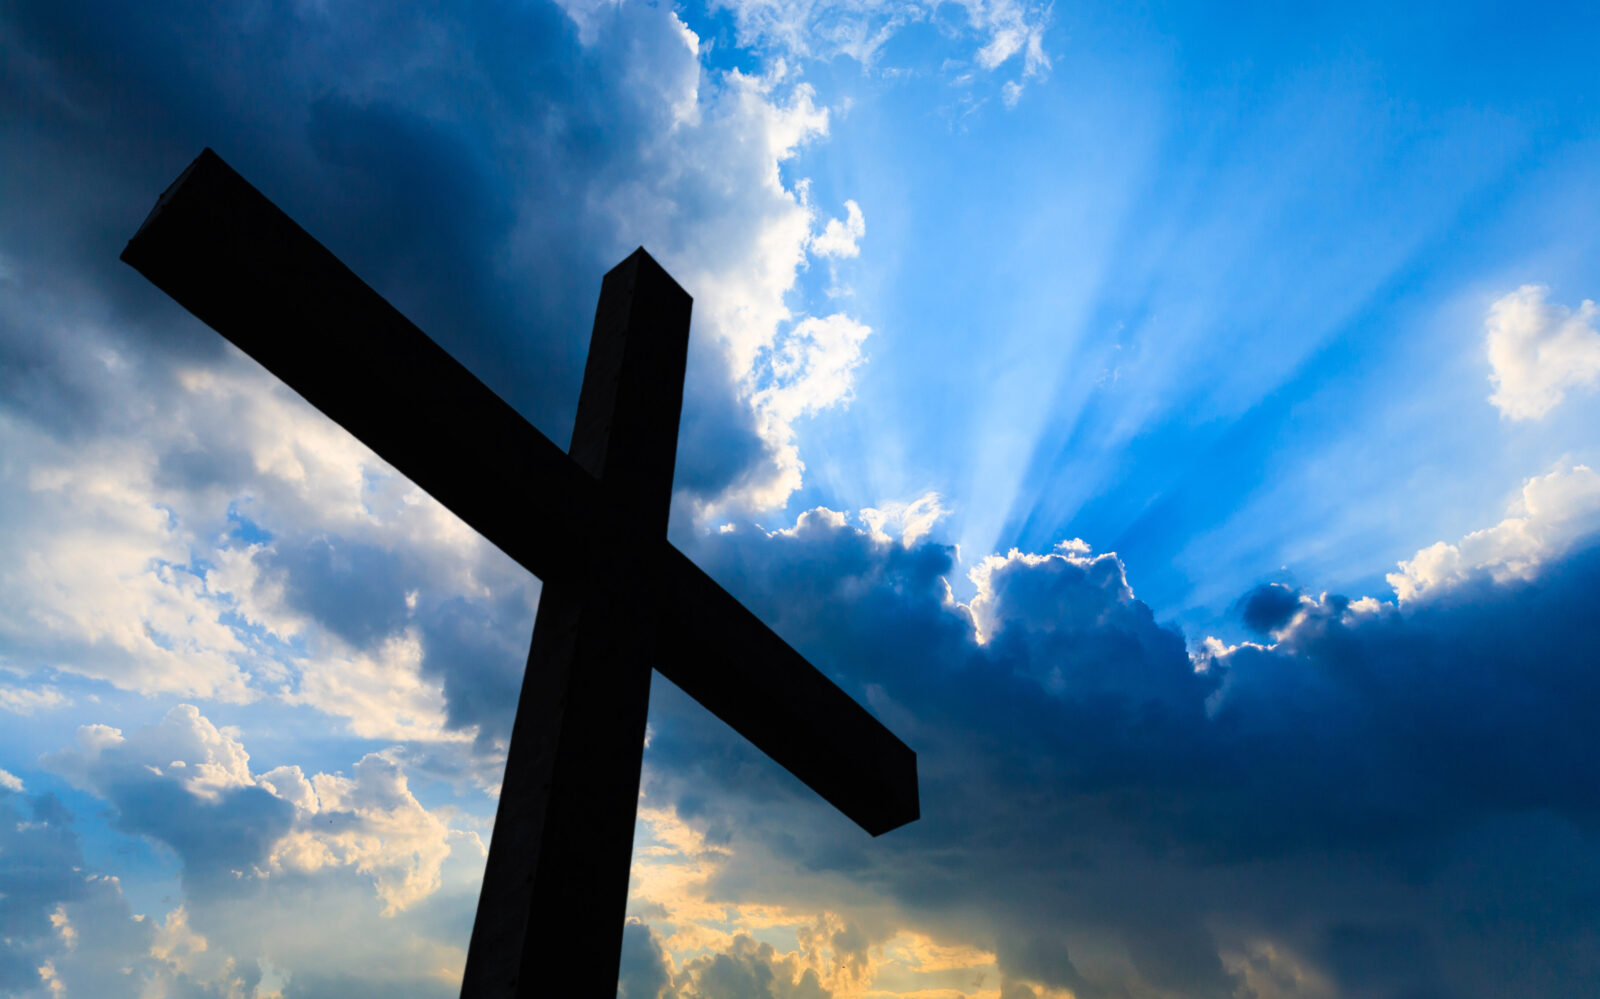 Silhouette of a cross against a blue sky with clouds